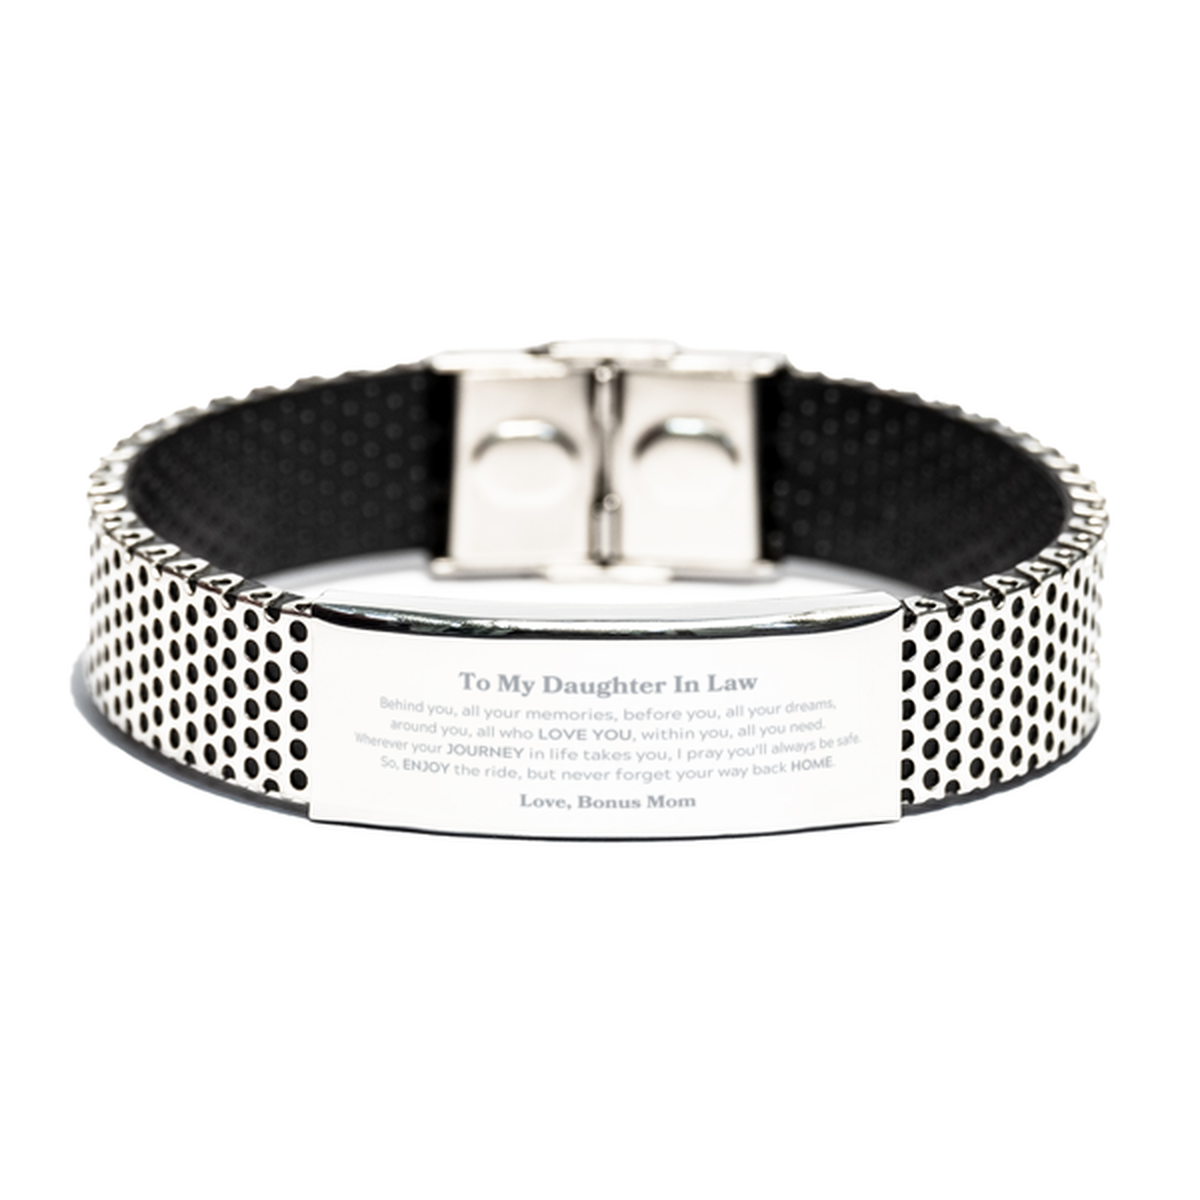 To My Daughter In Law Graduation Gifts from Bonus Mom, Daughter In Law Stainless Steel Bracelet Christmas Birthday Gifts for Daughter In Law Behind you, all your memories, before you, all your dreams. Love, Bonus Mom